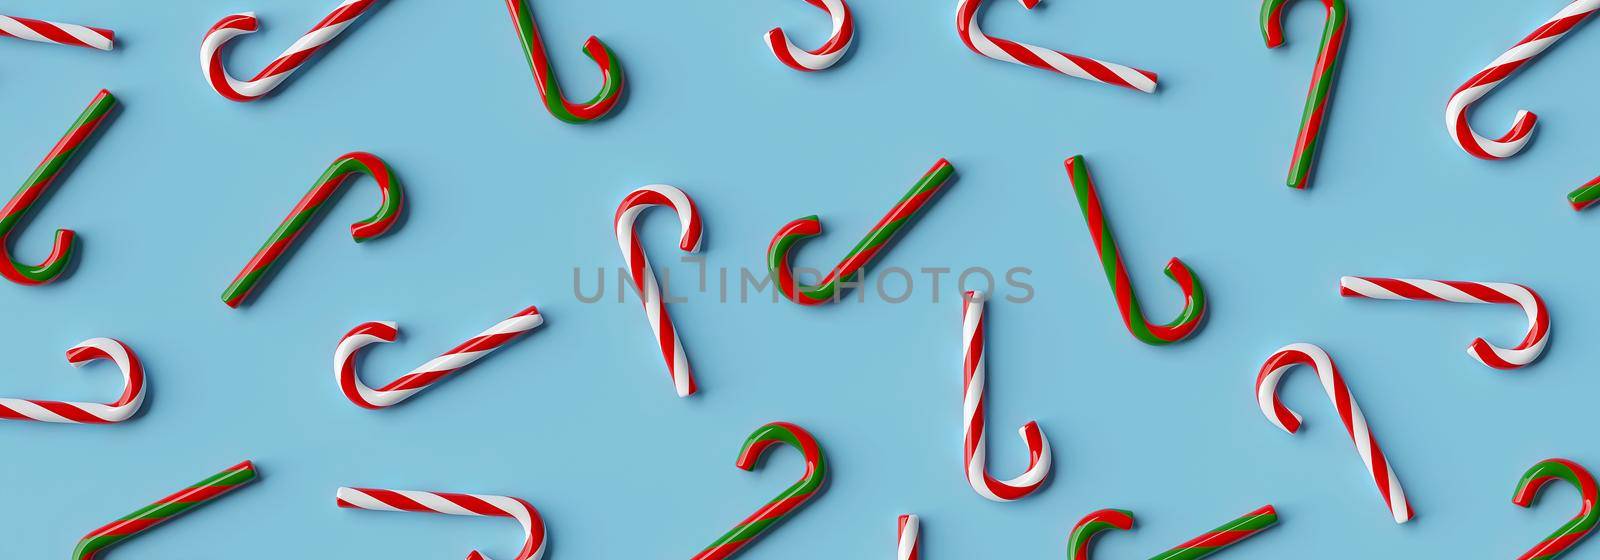 Christmas banner background of Christmas candy cane on a blue background, 3d rendering by nutzchotwarut